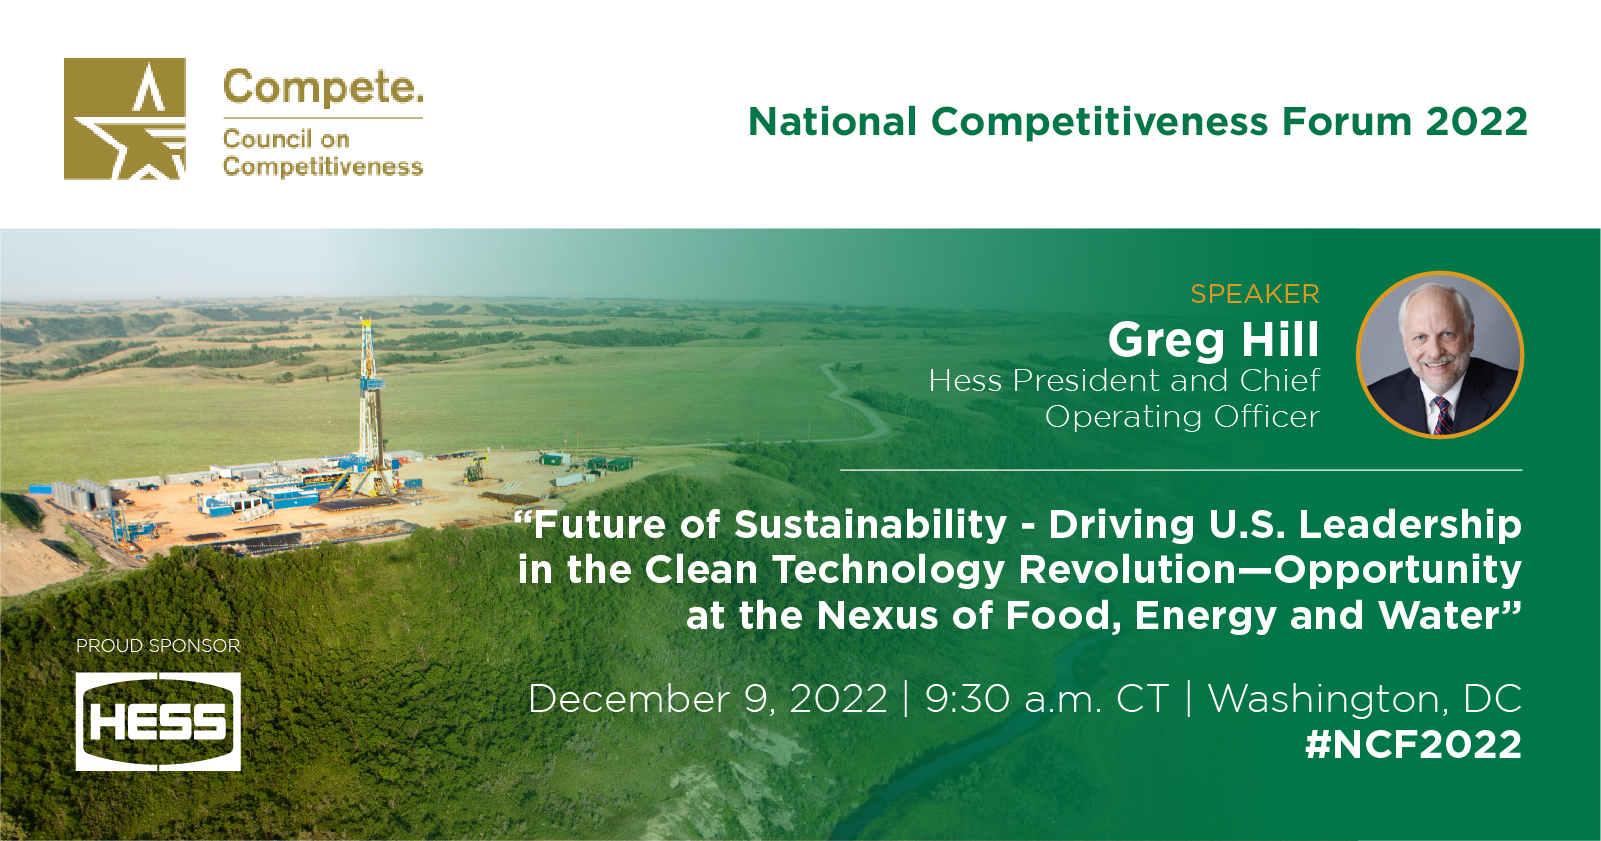 Greg Hill to Speak at National Competitiveness Forum 2022